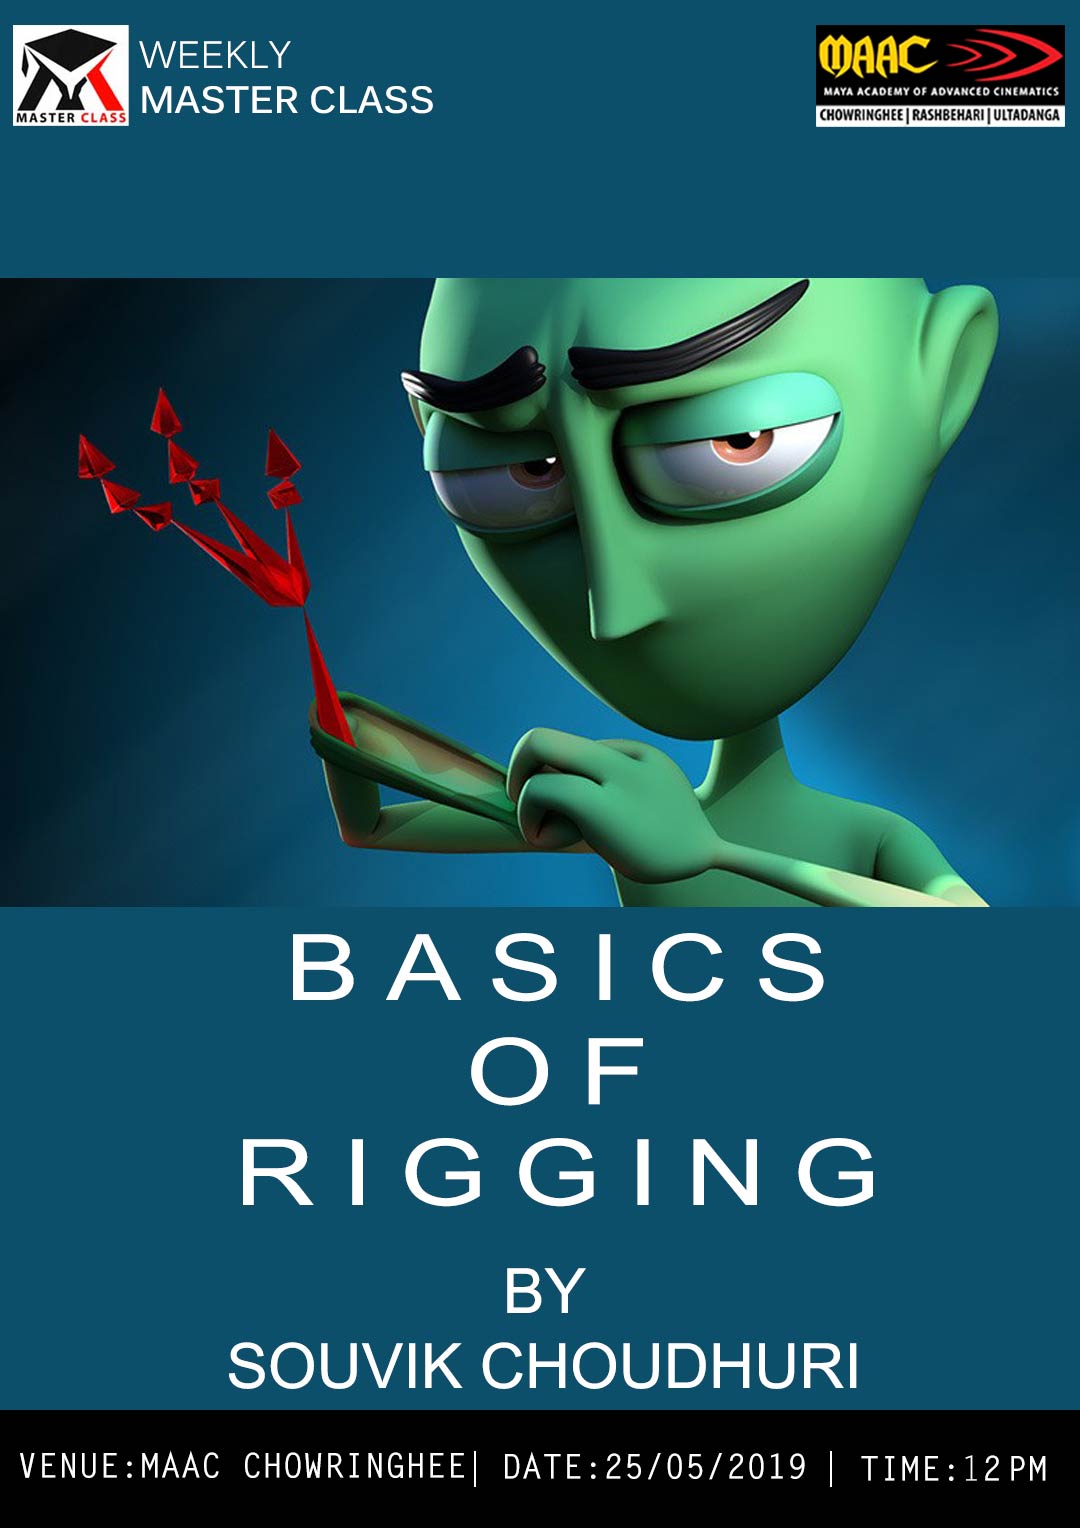 Weekly Master Class on Basics Of Rigging